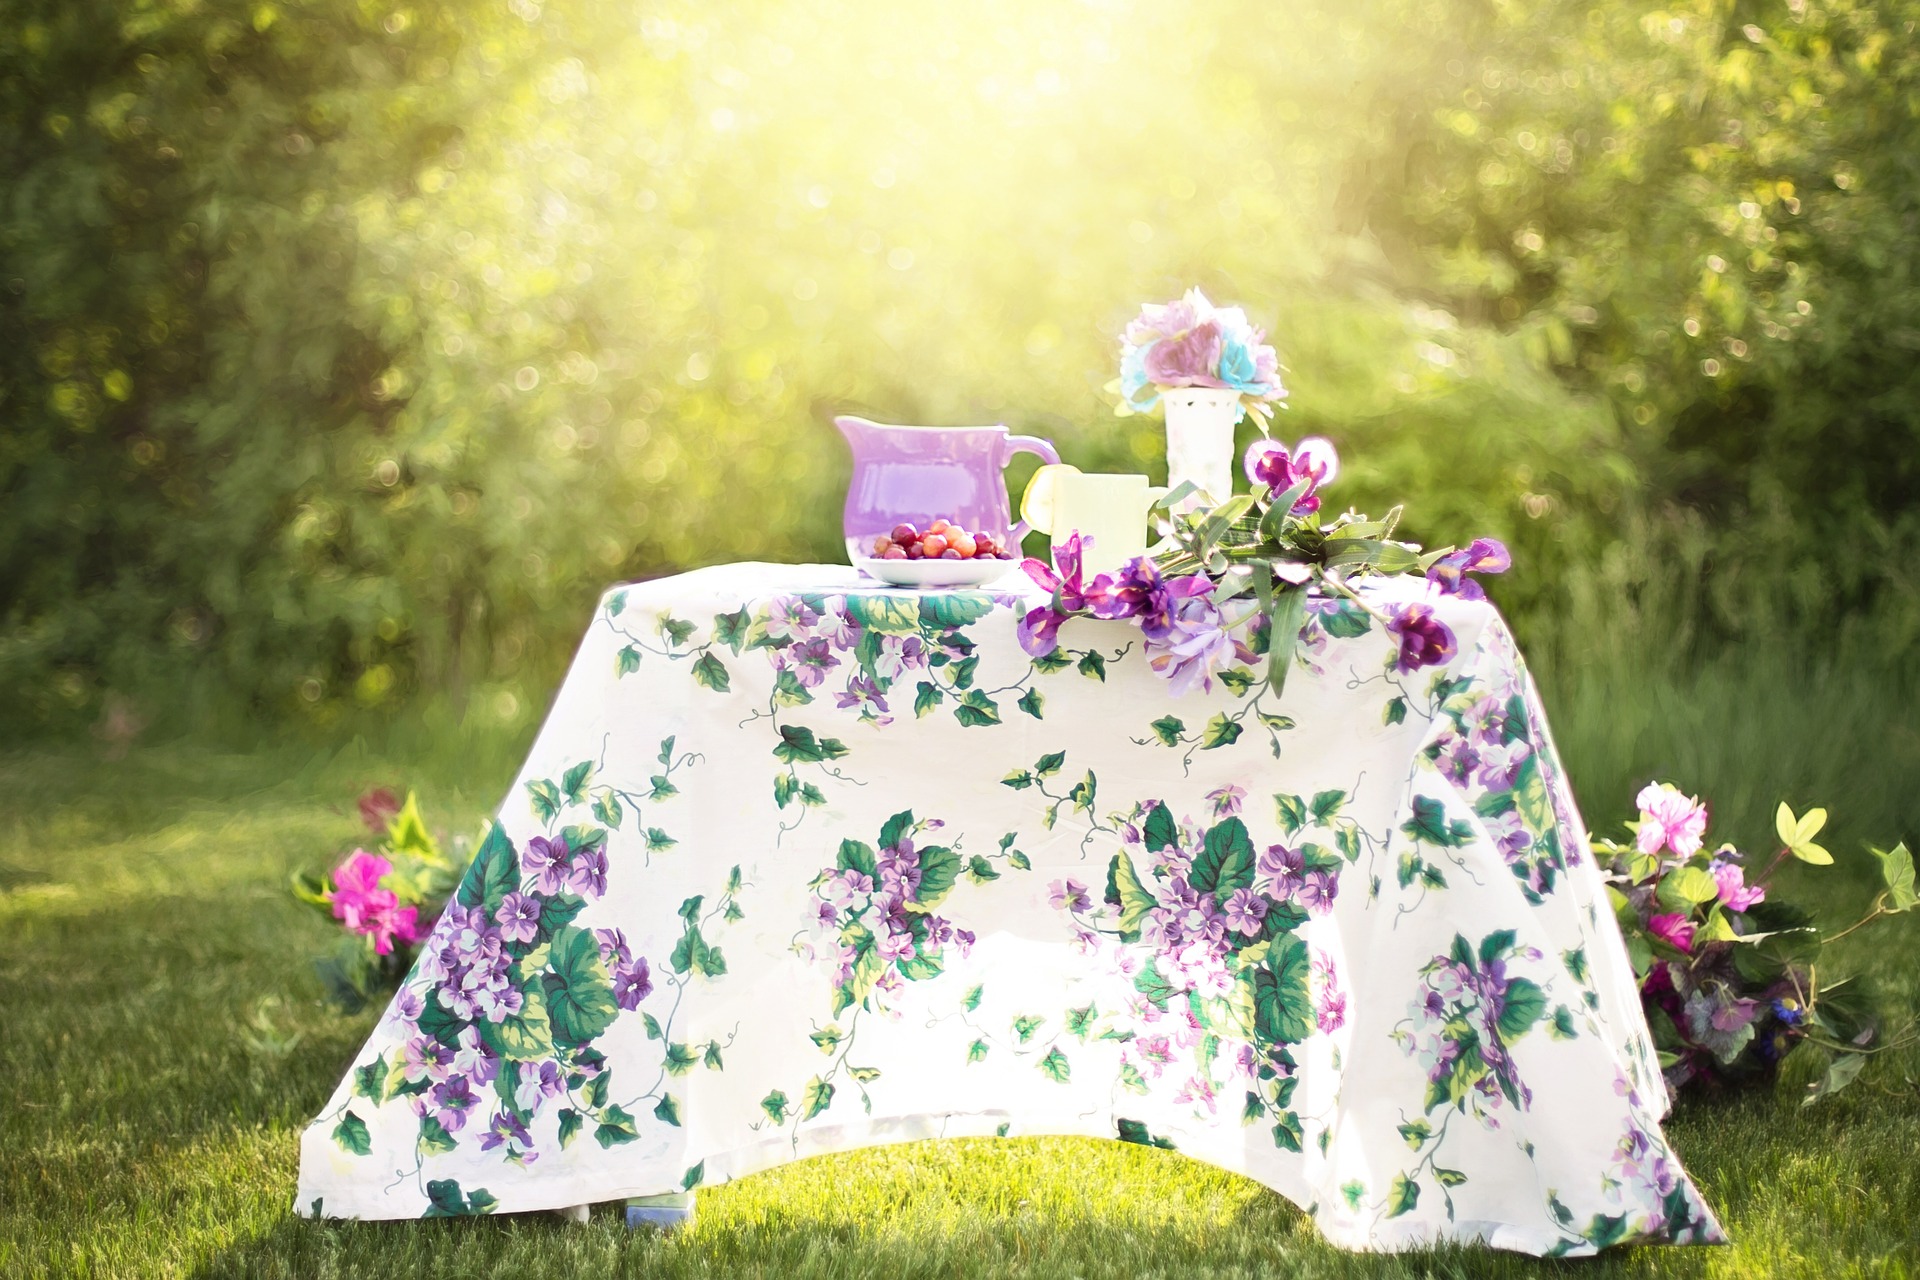 Table in a garden set up with purple flowers, a purple pitcher, and grapes